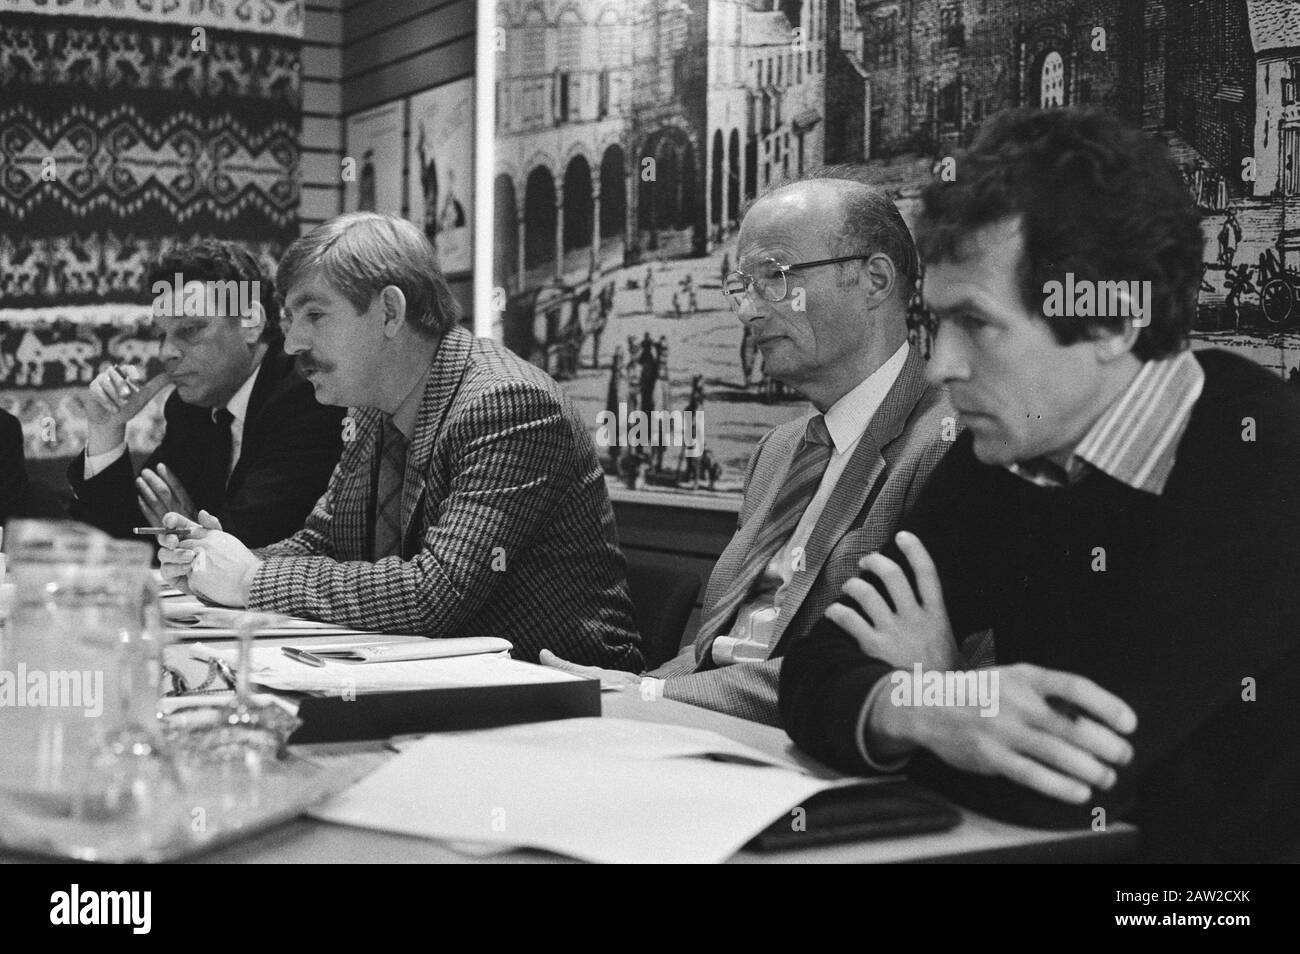 Press conference in Nieuwspoort Energy Research cents Netherlands on solar water heaters Date: December 18, 1980 Location: Netherlands Keywords: press conferences Institution Name: Nieuwspoort Stock Photo